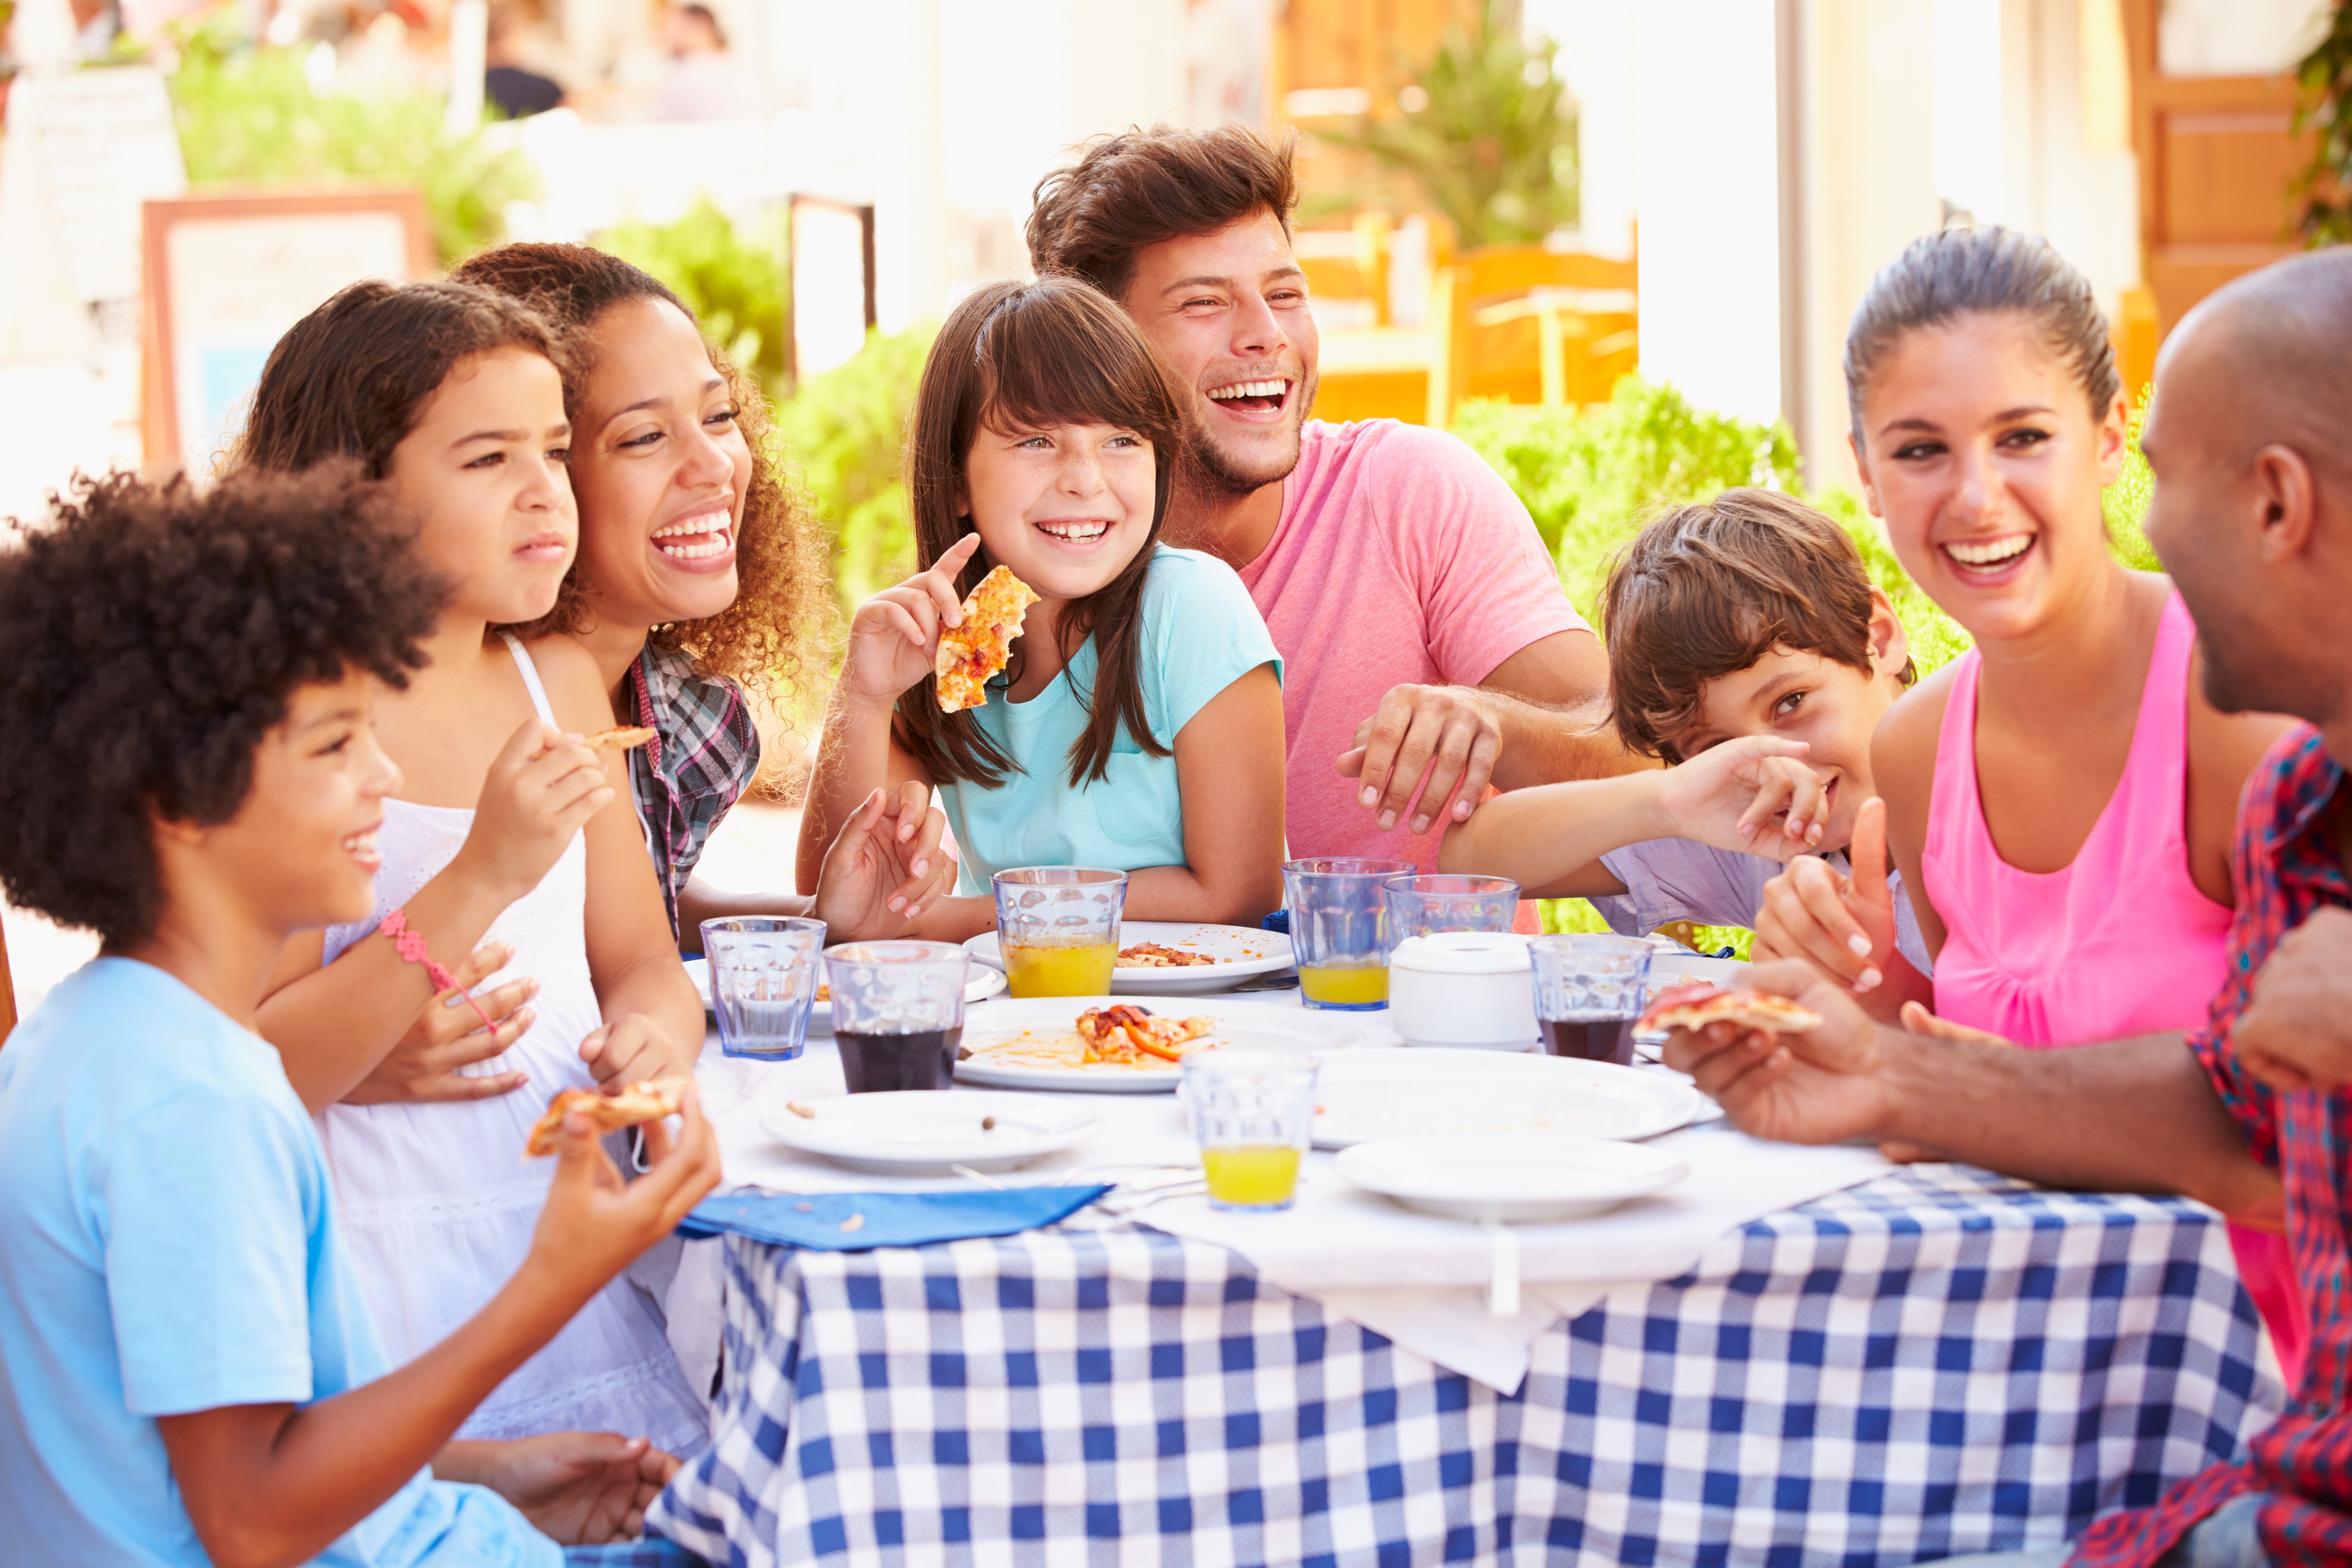 Top 5 Restaurant Trends for Mother’s Day